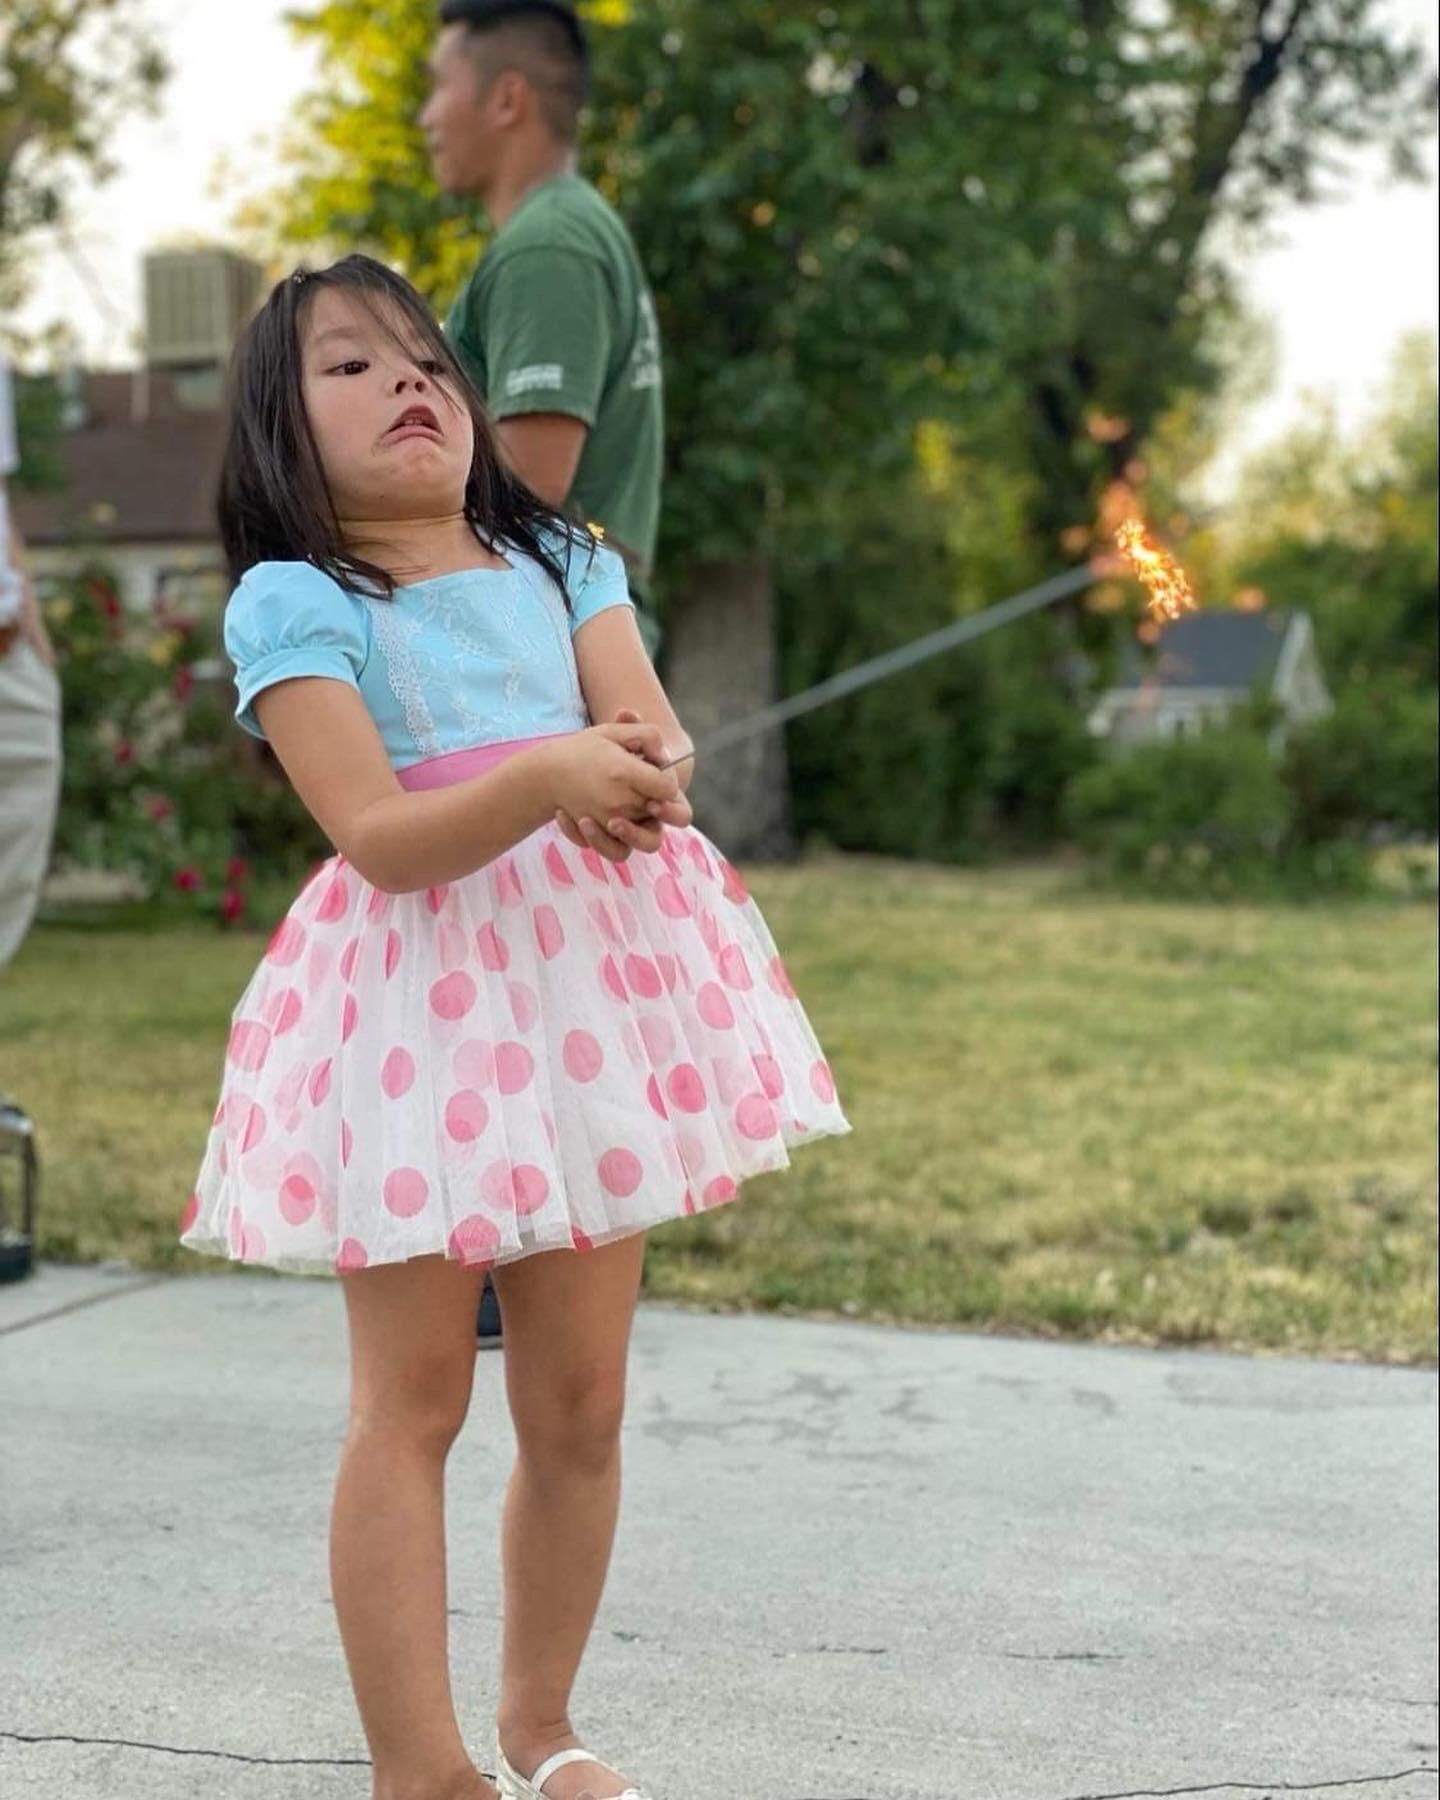 My niece’s first experience with a sparkler